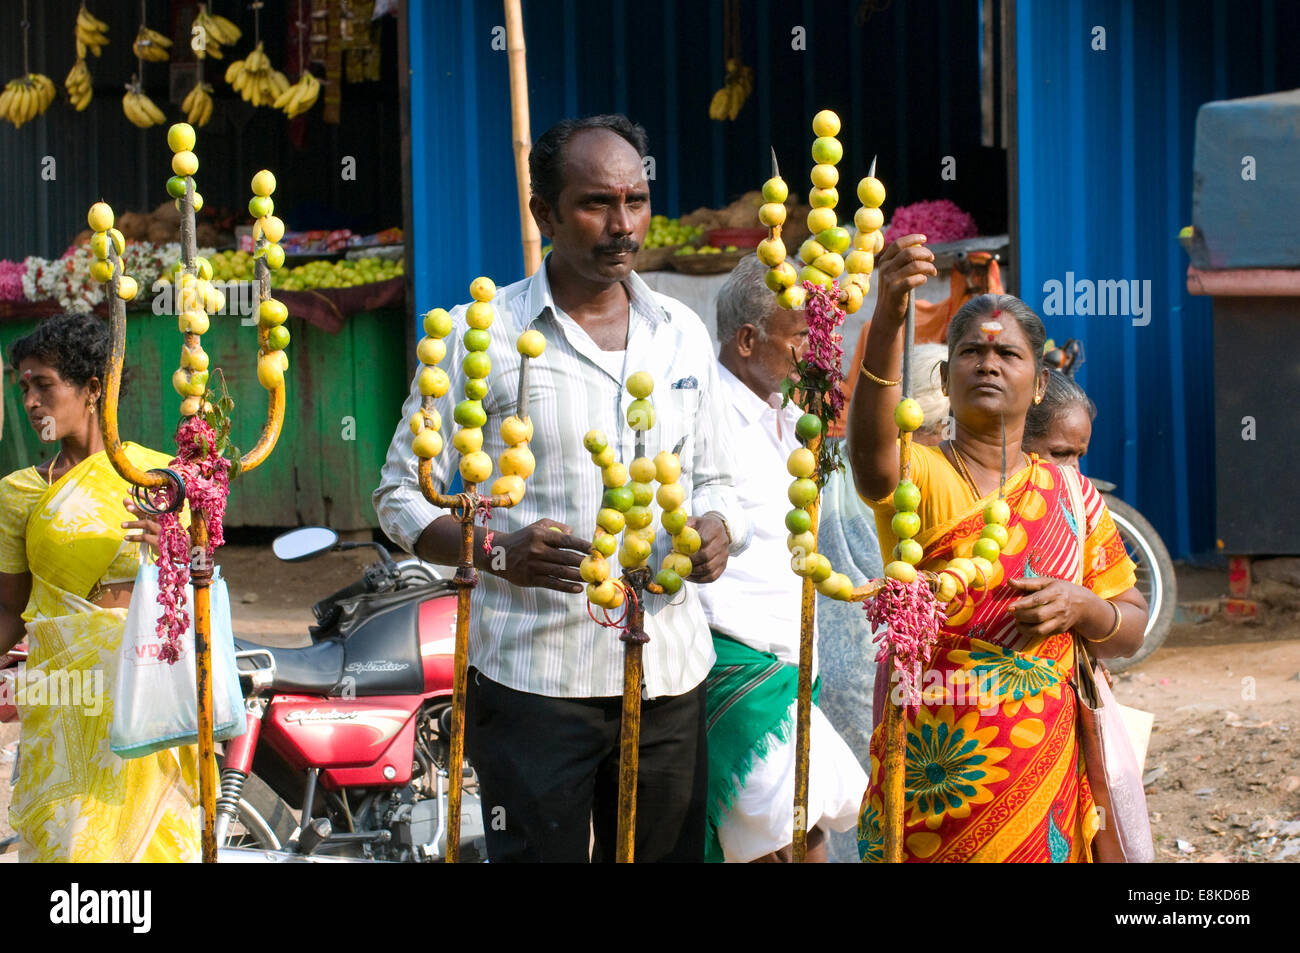 Hindu devotees offering prayers, salutations & offerings of limes pierced onto sacred trident weapons outside the Goddess Durga Stock Photo